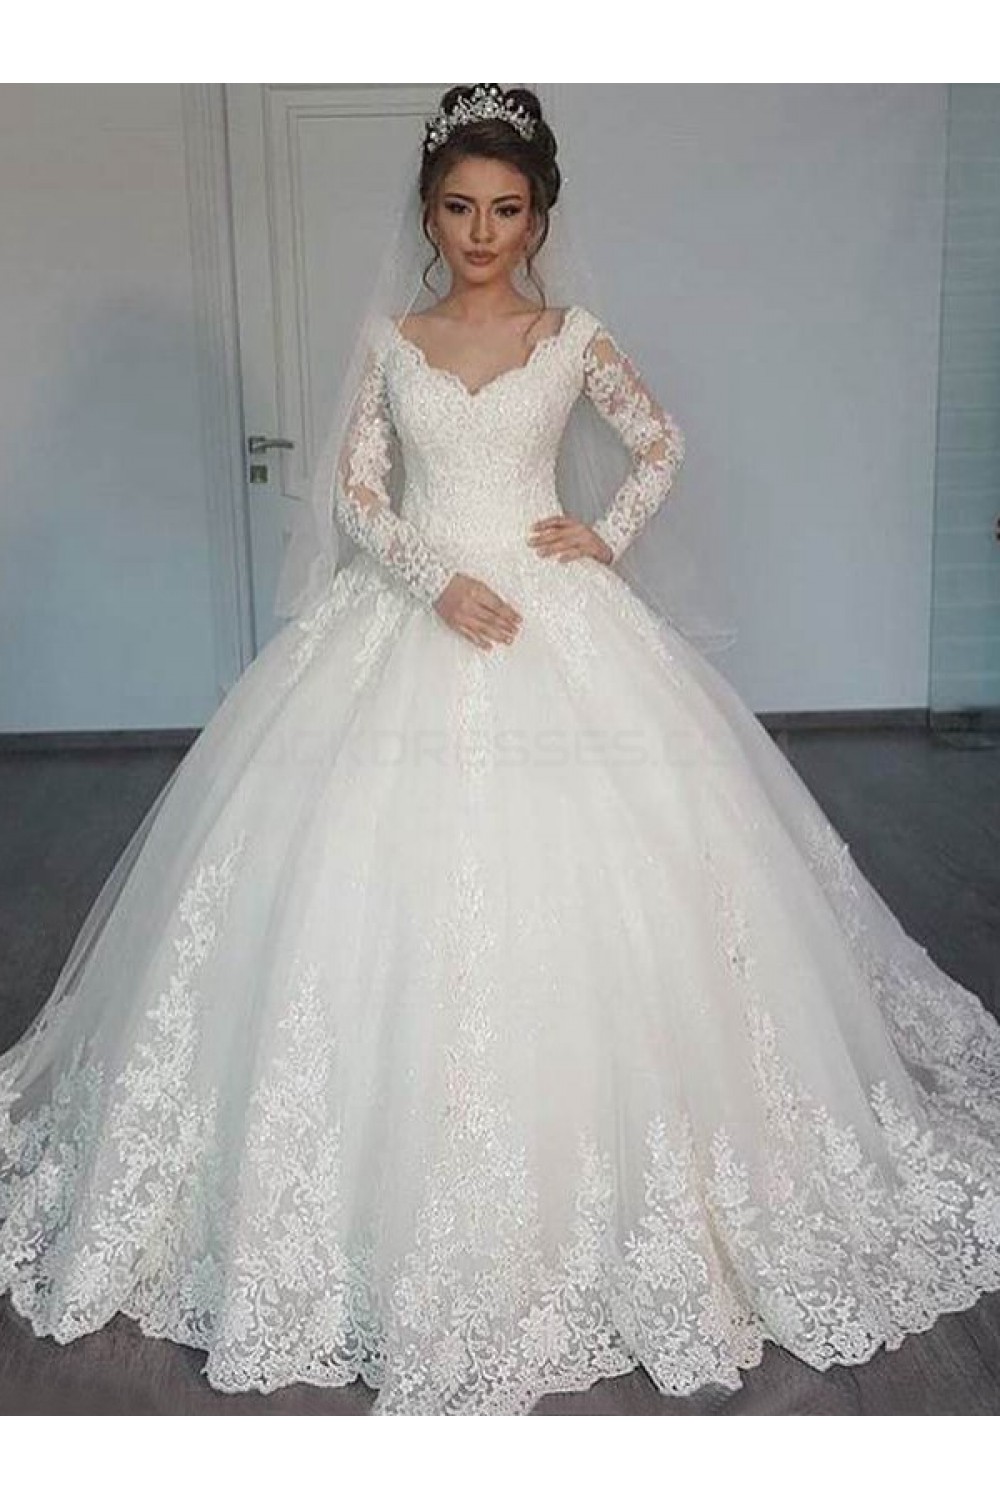 Bridal Ball Gown VNeck Lace Long Sleeves Wedding Dresses Bridal Gowns